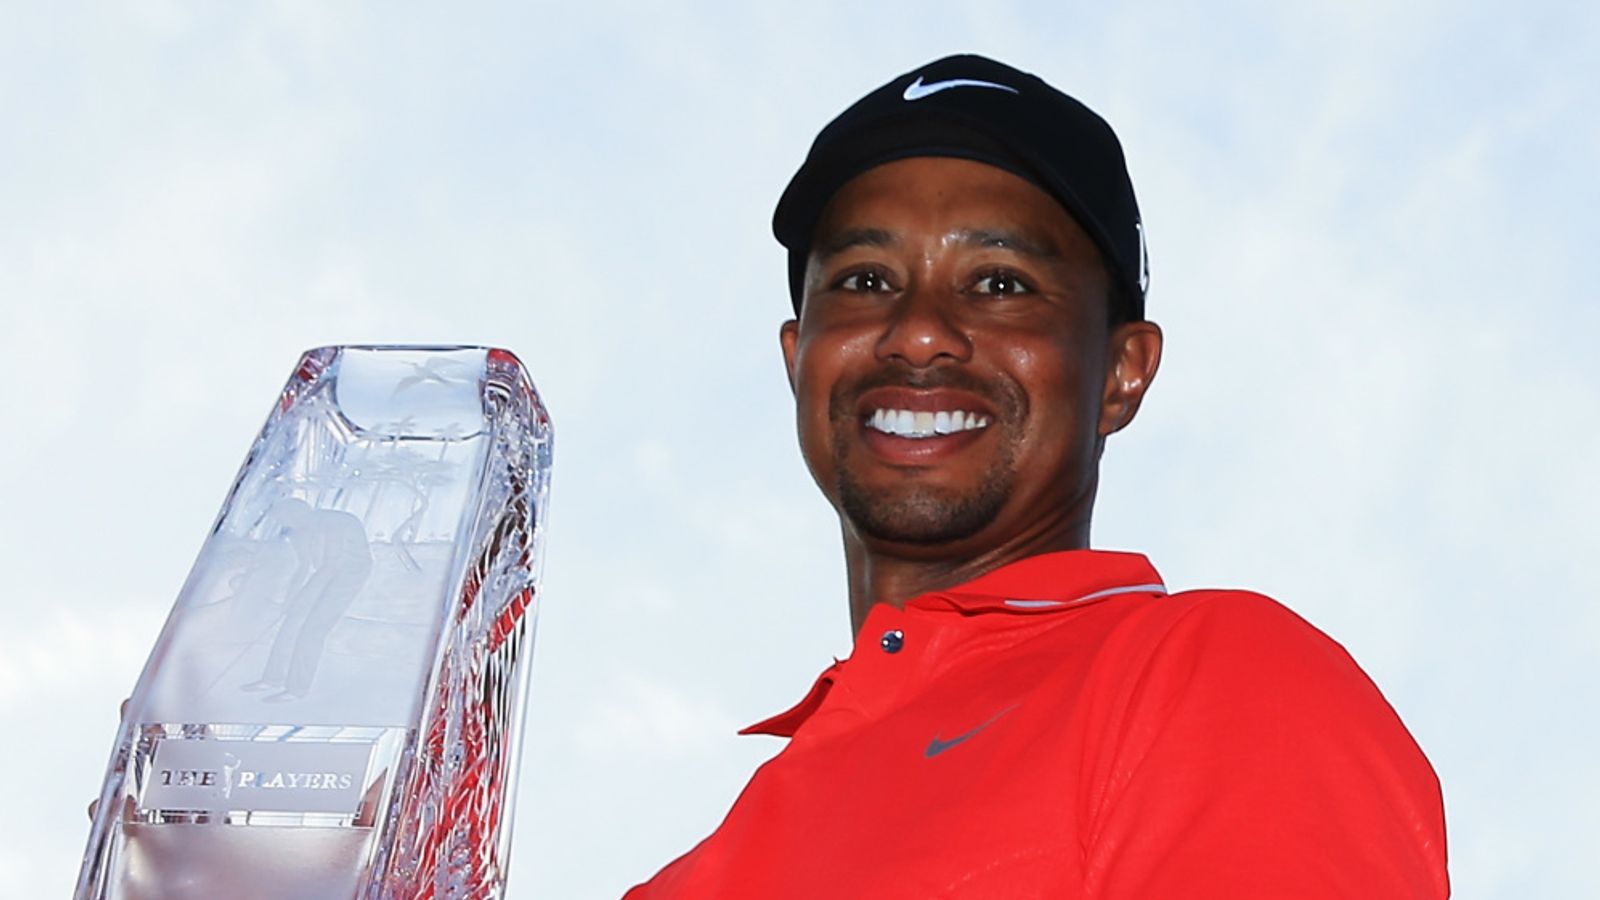 Tiger Woods takeover Highlights of his greatest wins on Sky Sports